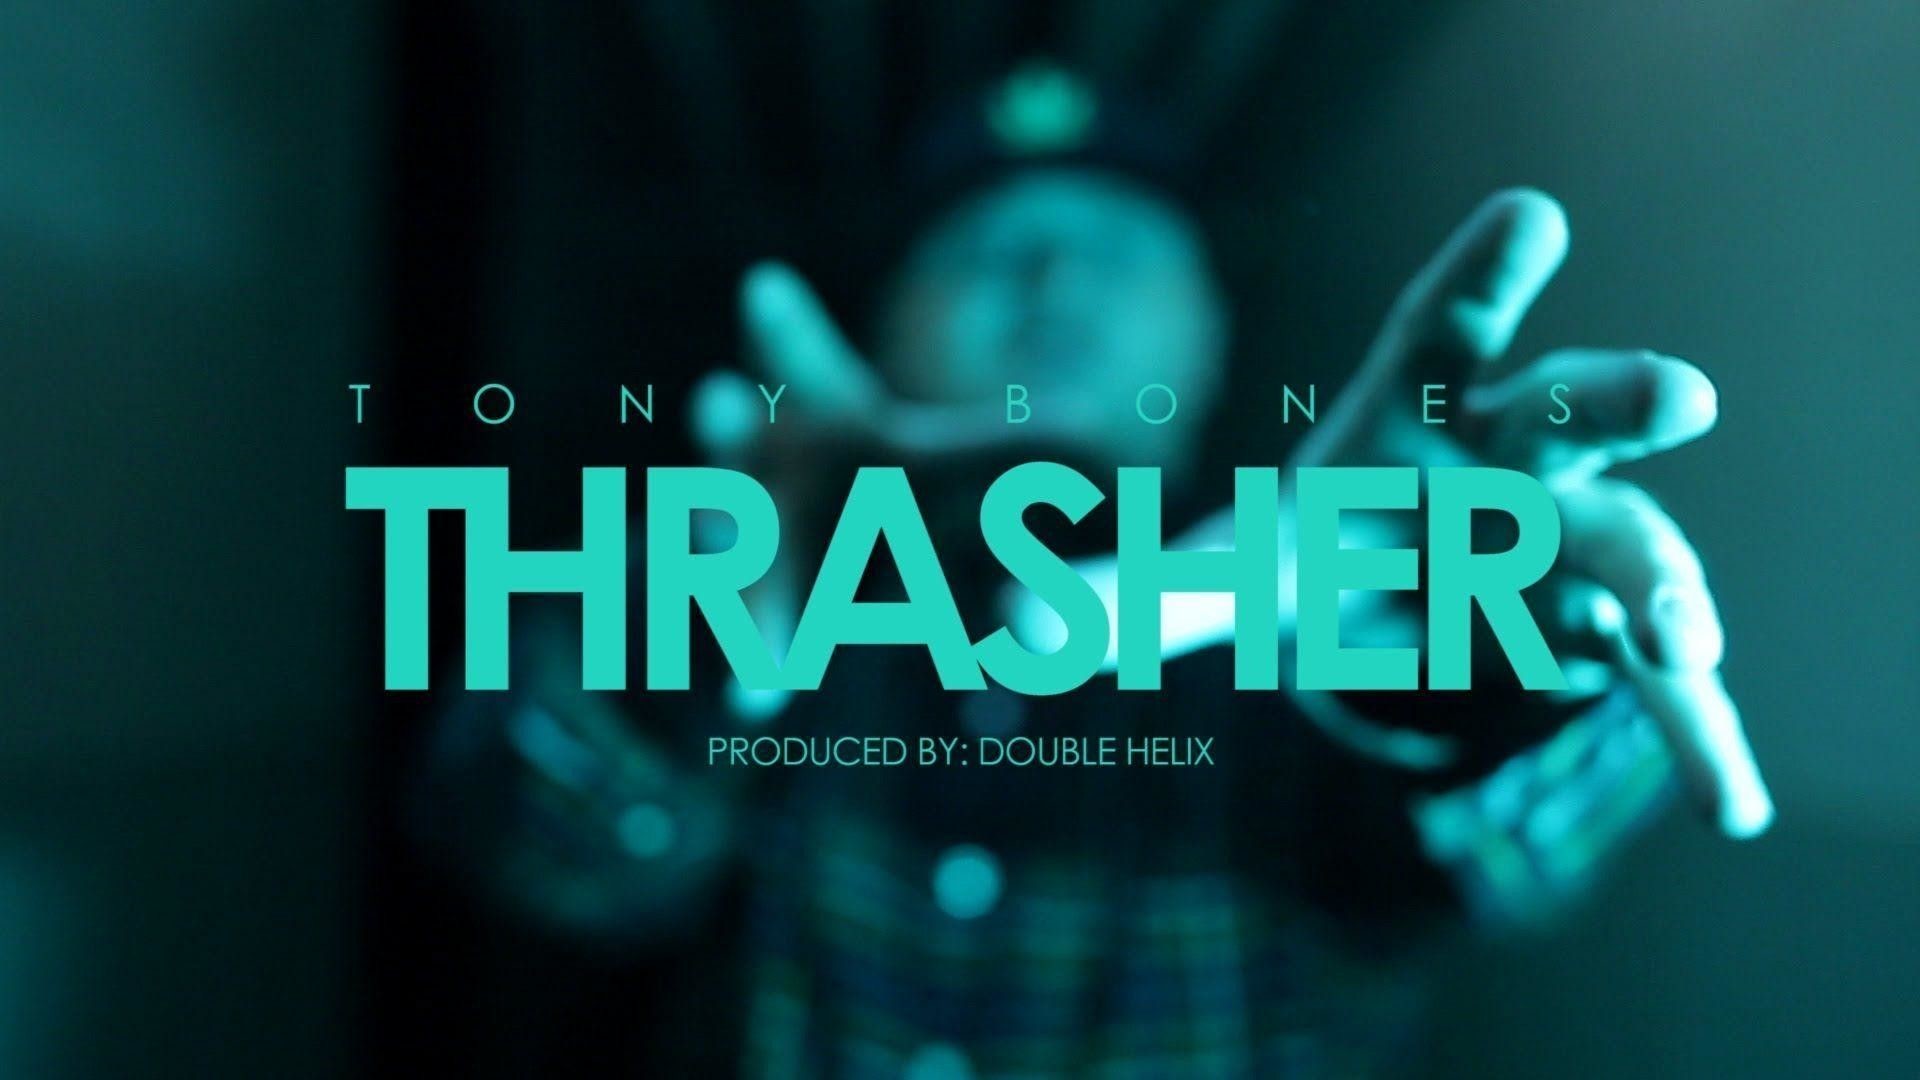 1920x1080  736x1306 wallpapers WALLPAPERS Pinterest Thrasher Wallpaper and">